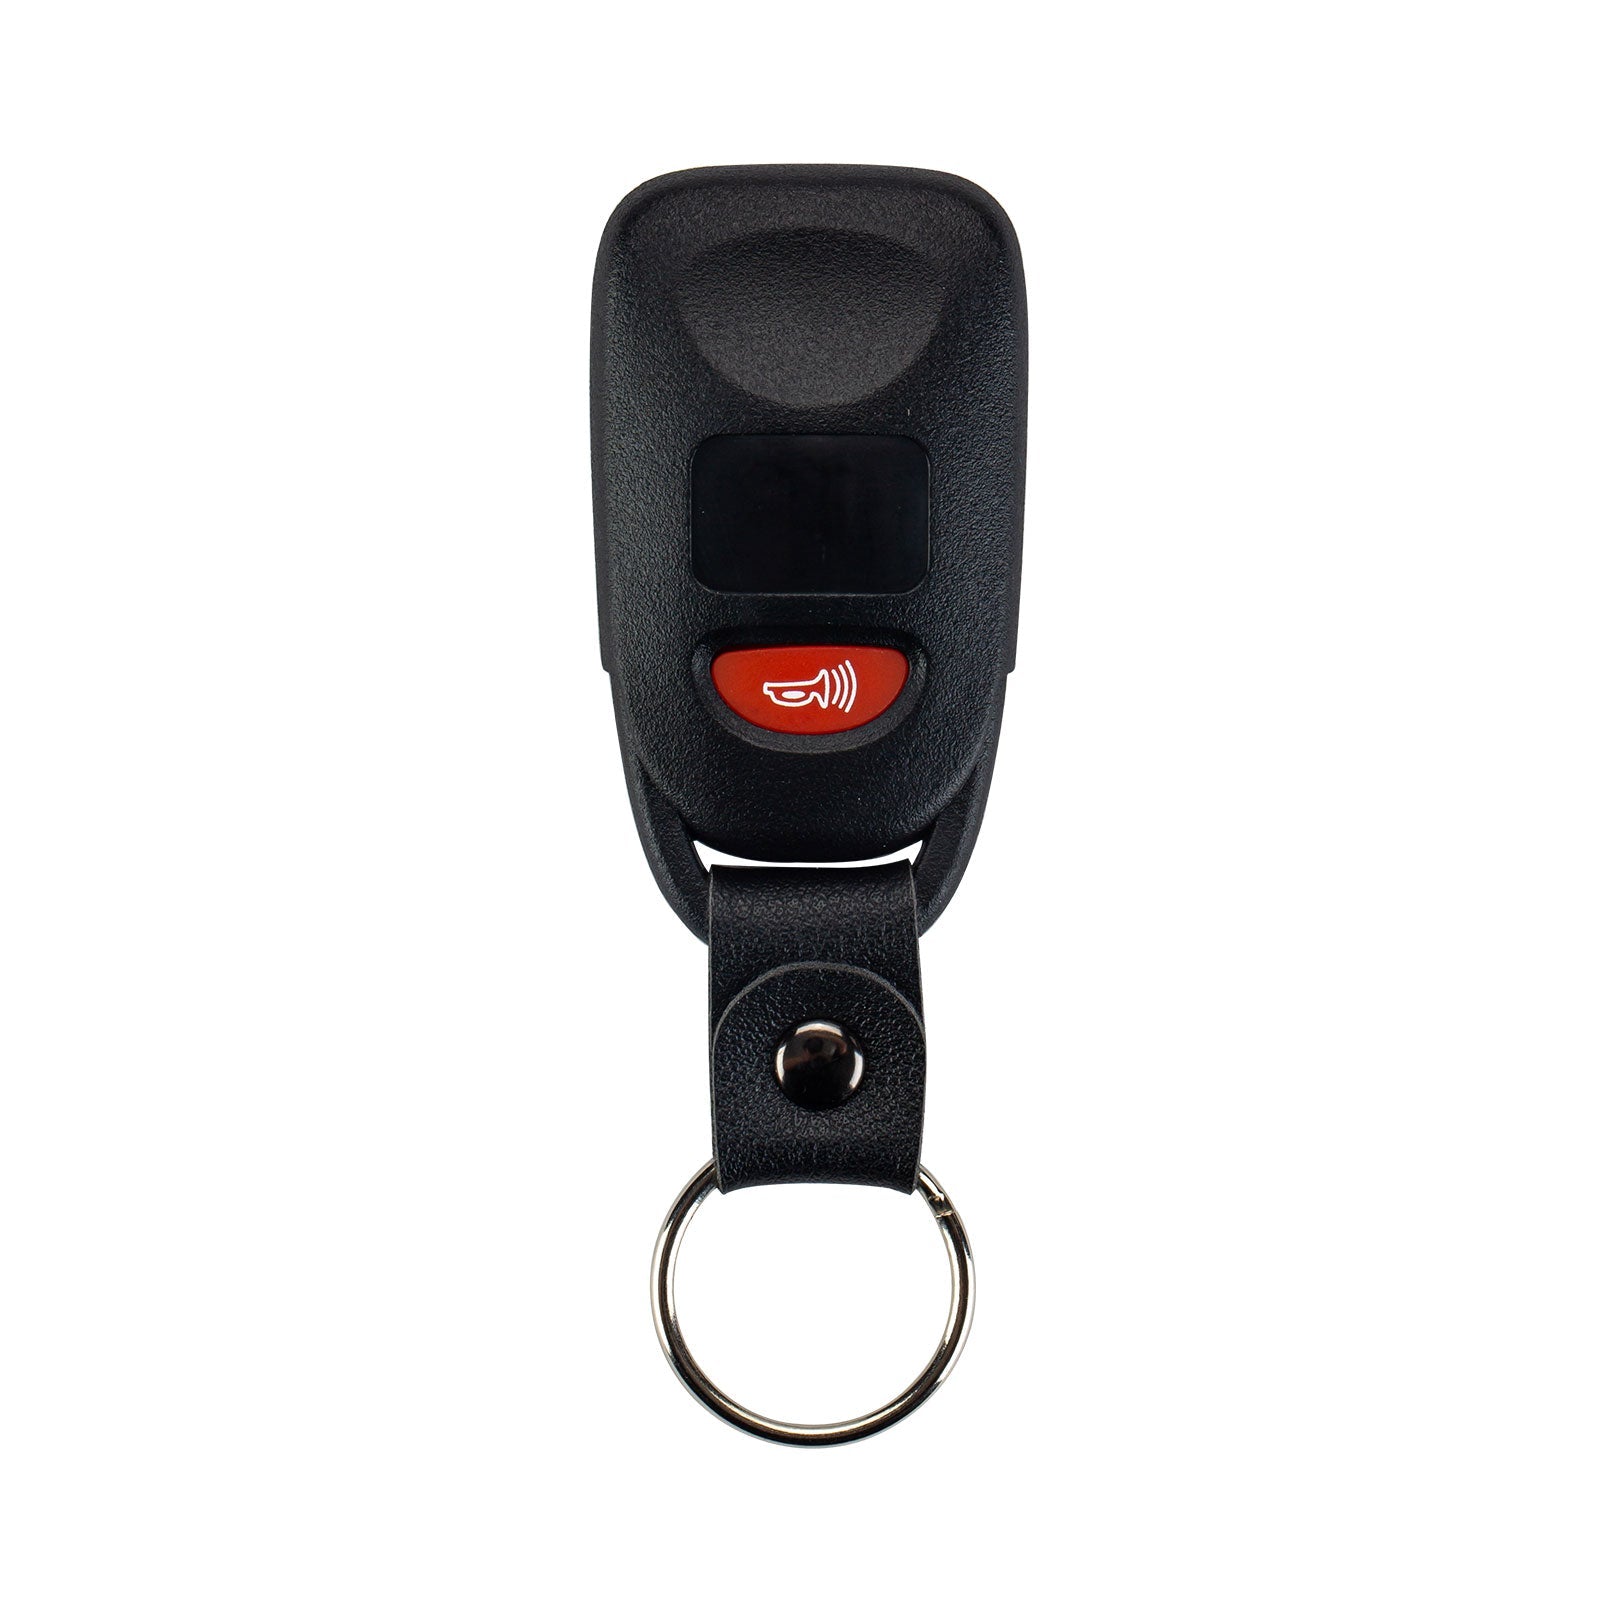 Replacement for Keyless Entry Remote fit for KIA 2009-2011, Rio 2009-2013 Sorento PINHA-T036  KR-K3RC